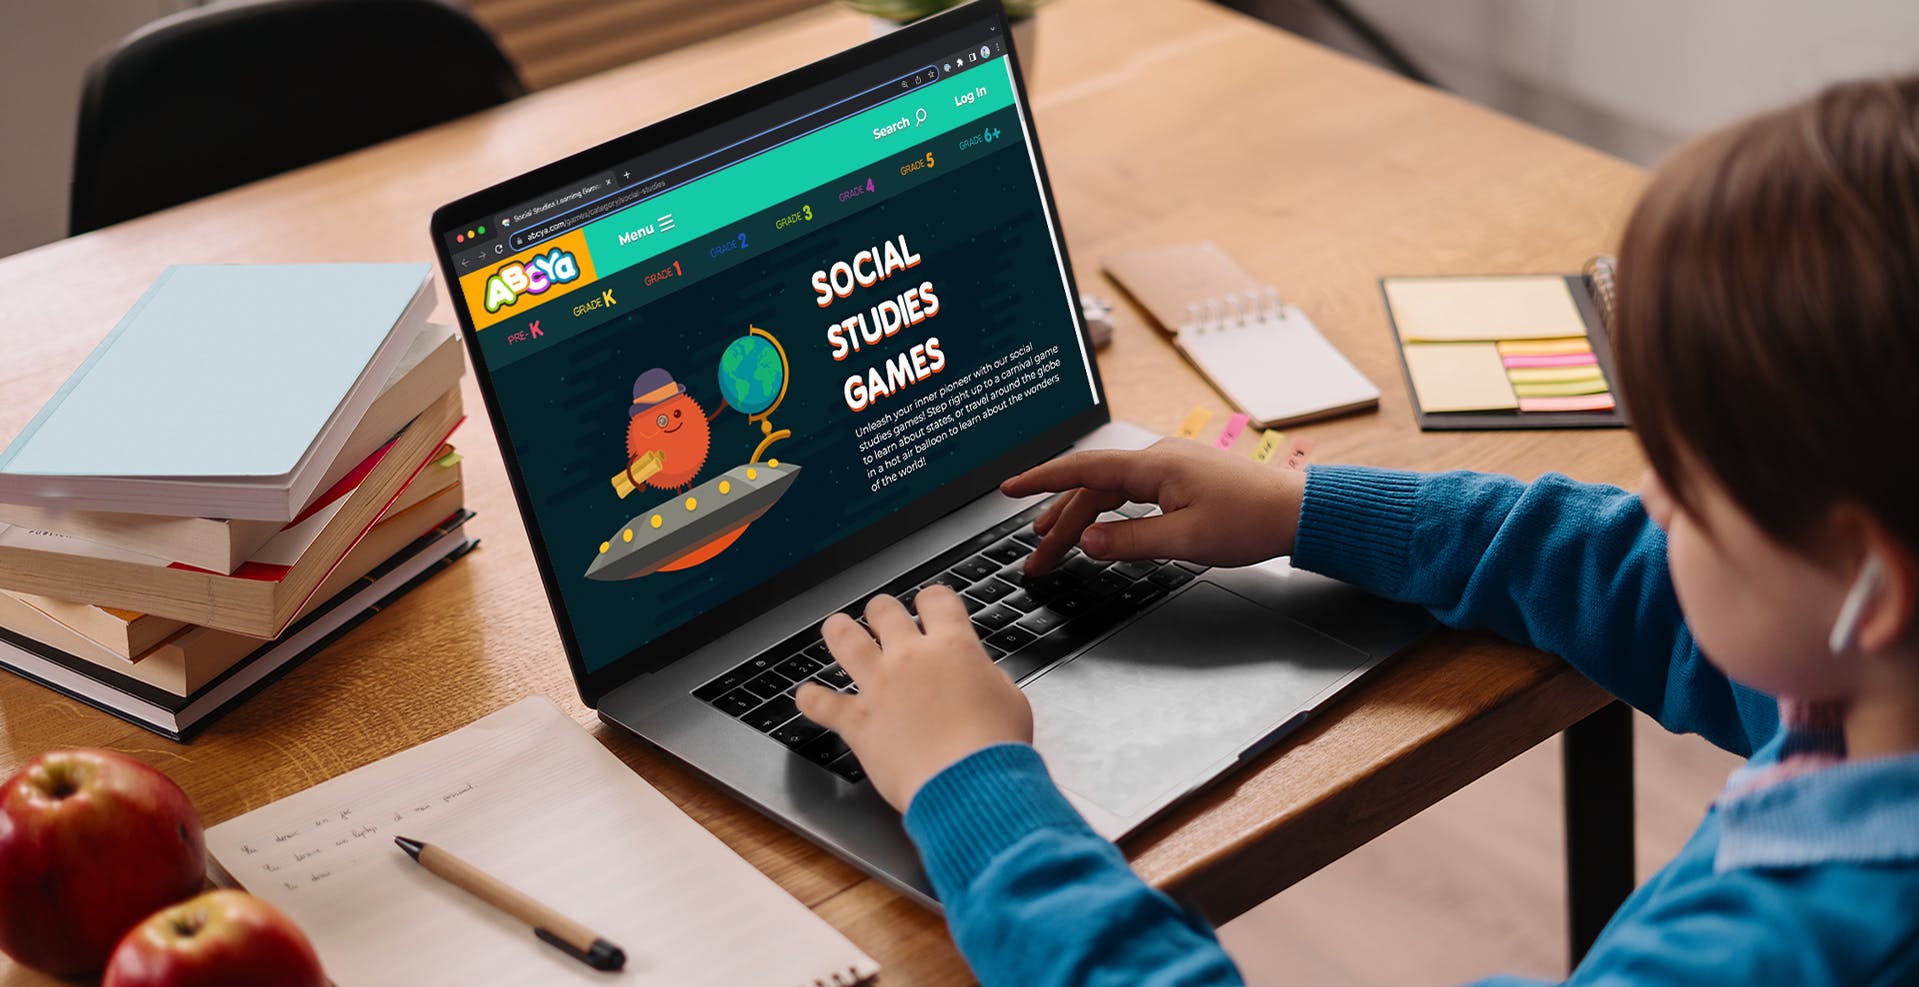 10 Fun and Free Social Studies Game Sites for Kids - The Krazy Coupon Lady